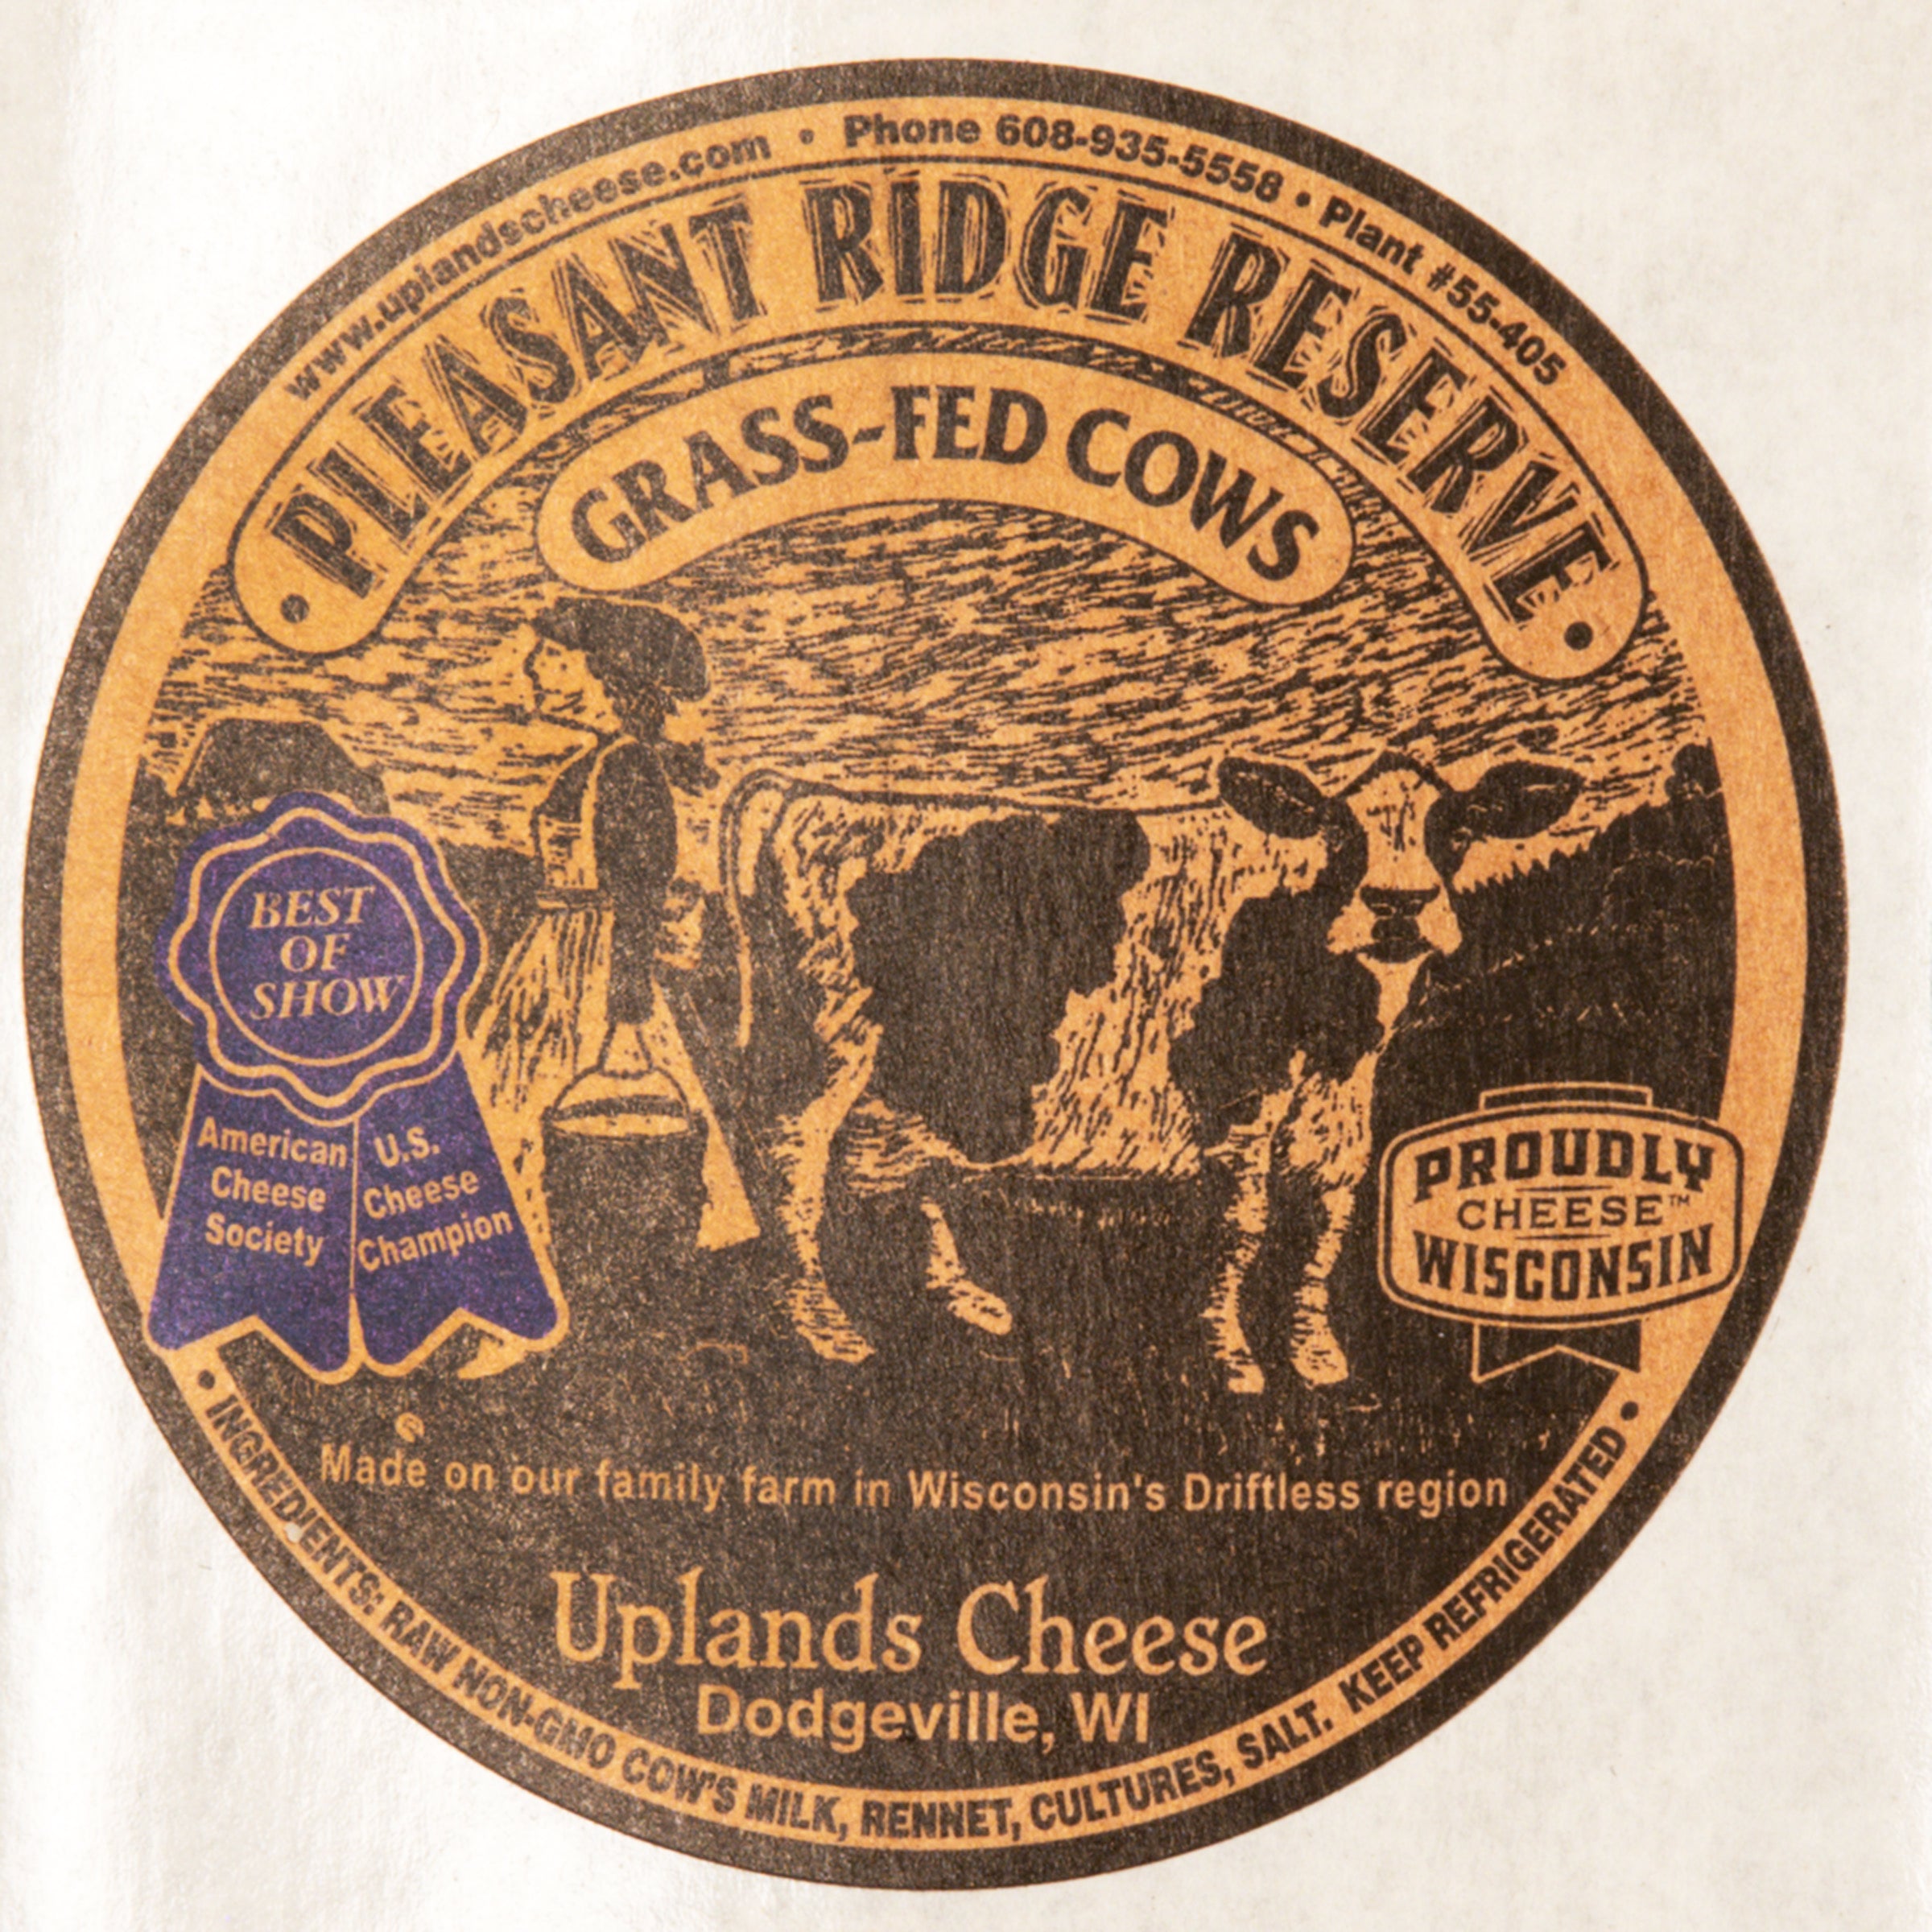 Pleasant Ridge Reserve Cheese_Cut & Wrapped by igourmet_Cheese